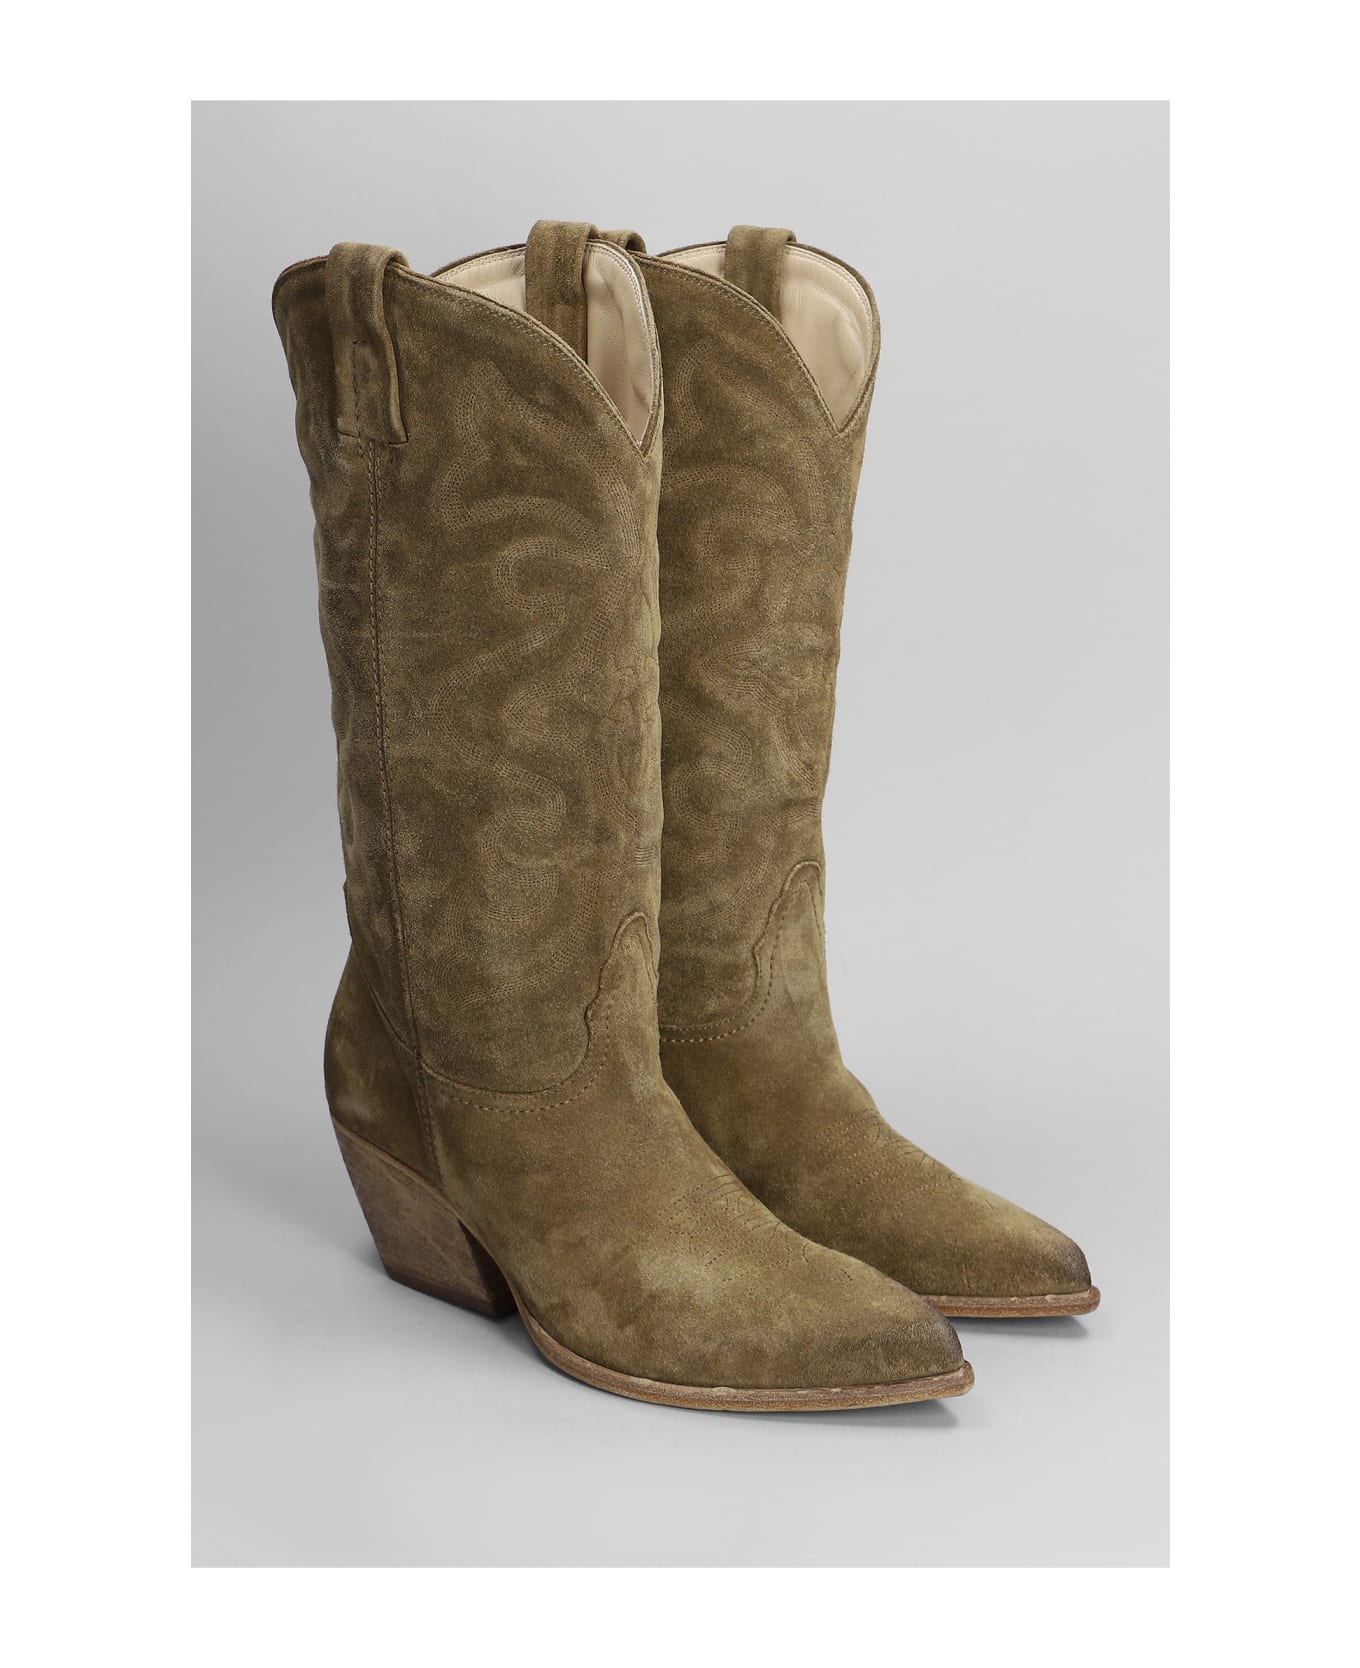 Elena Iachi Texan Boots In Taupe Suede - taupe